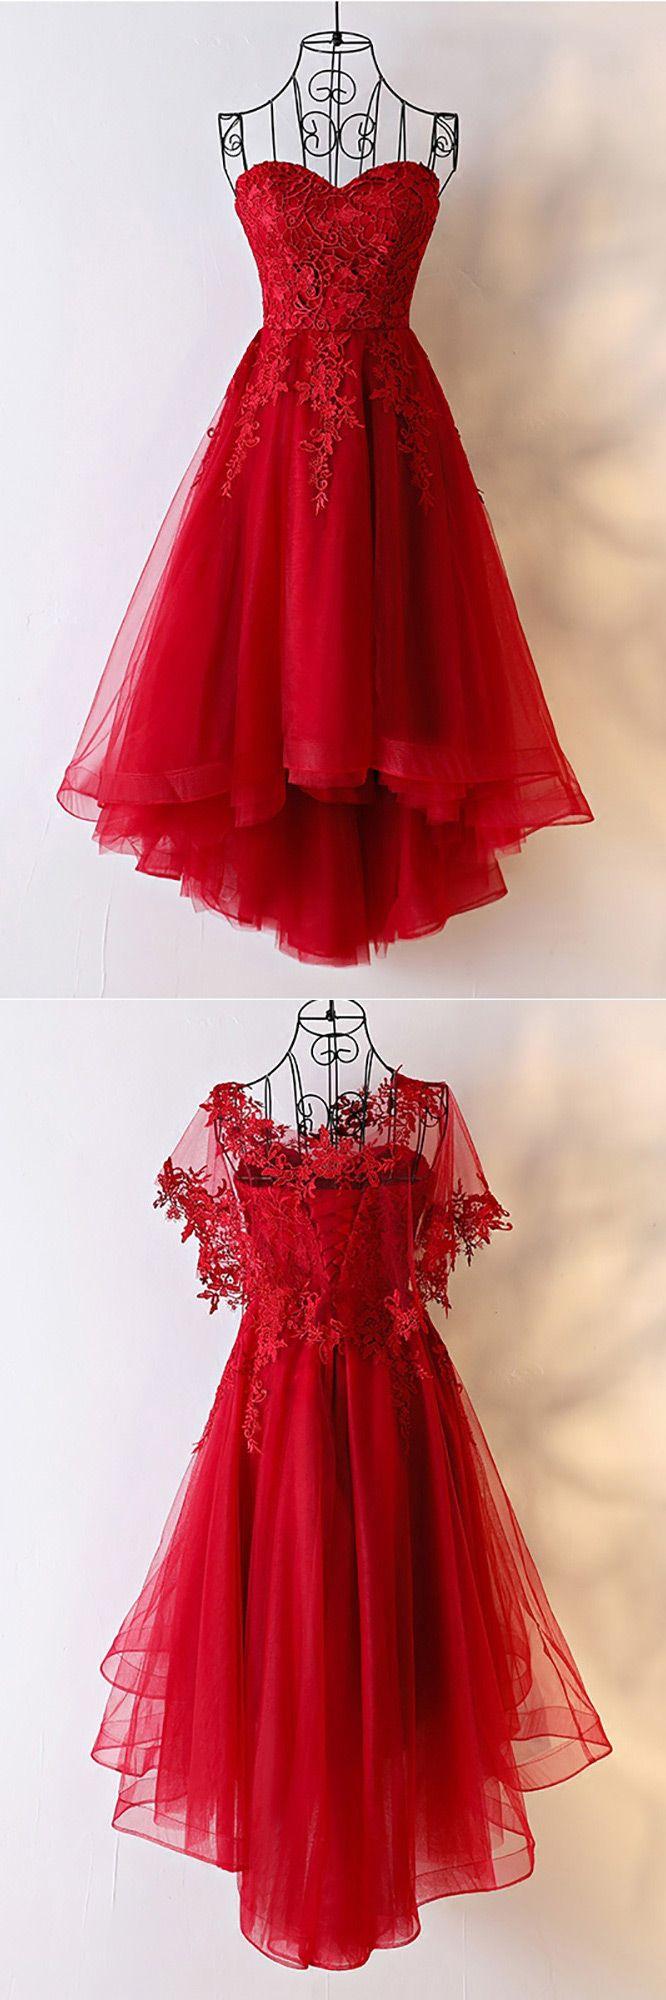 Mariage - Unique Burgundy High Low Tulle Cheap Prom Dress With Appliques - $99 #MYX18200 - SheProm.com